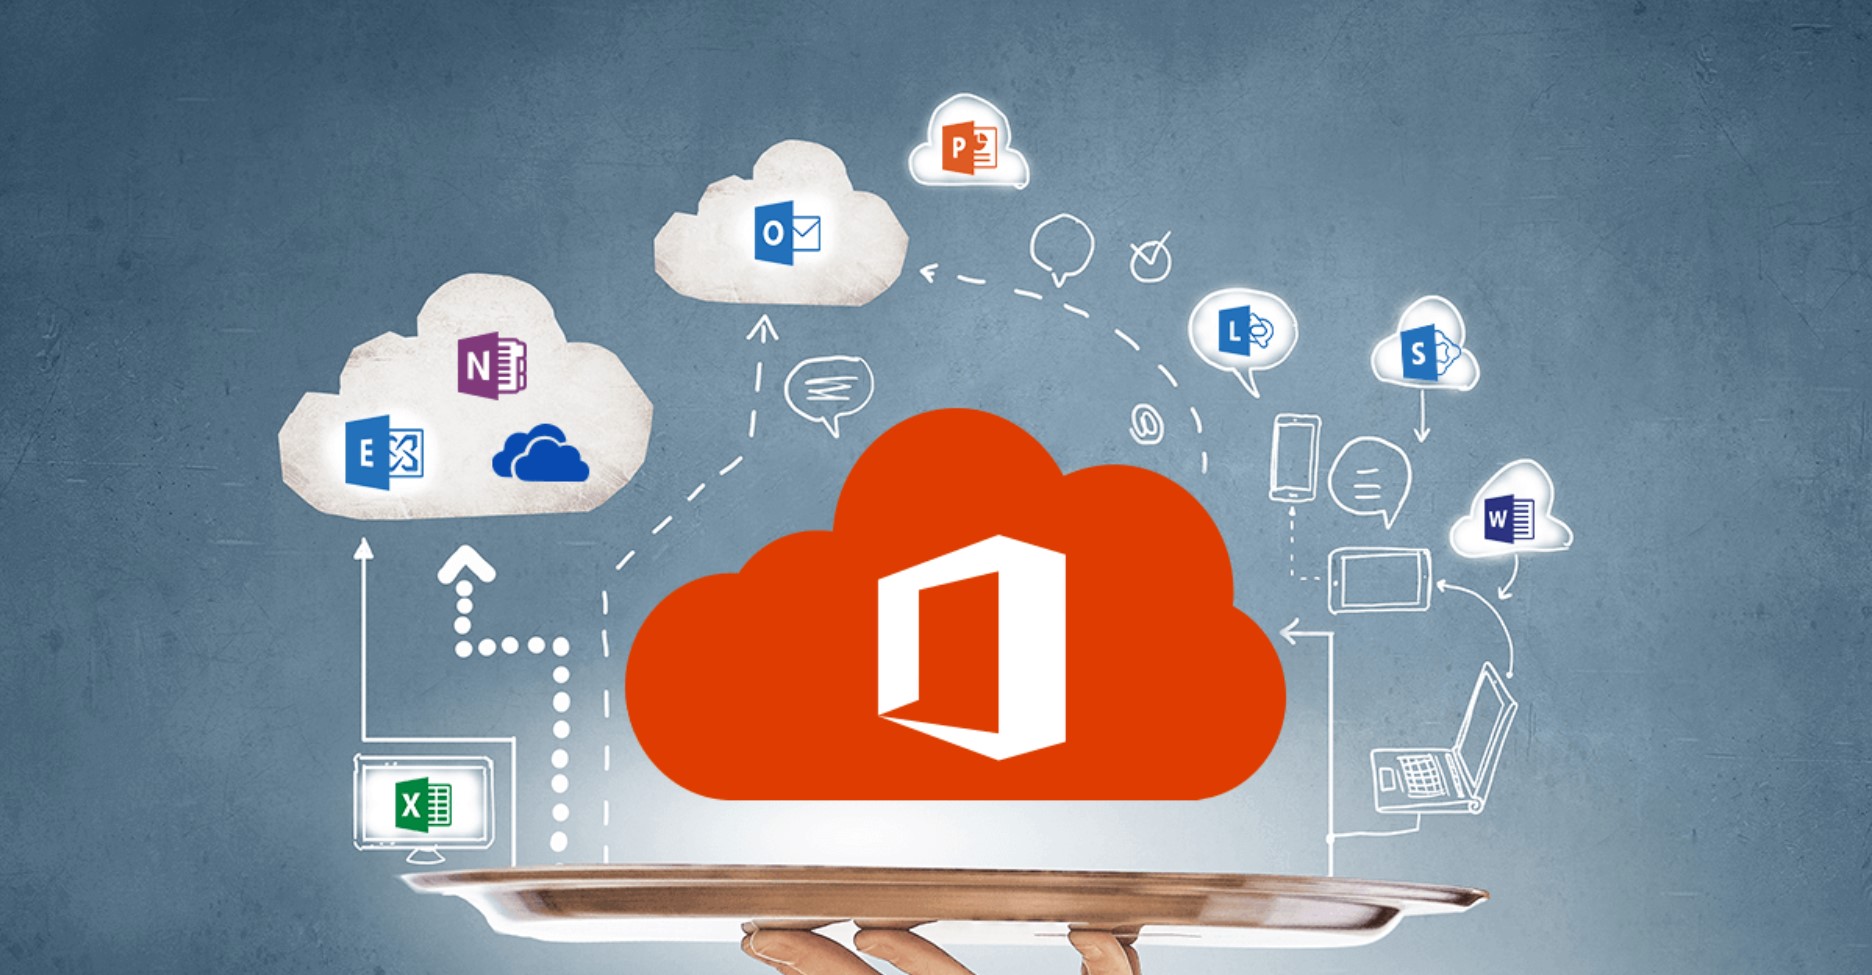 Integrating MS Office with Cloud Services: Staying Connected Anywhere